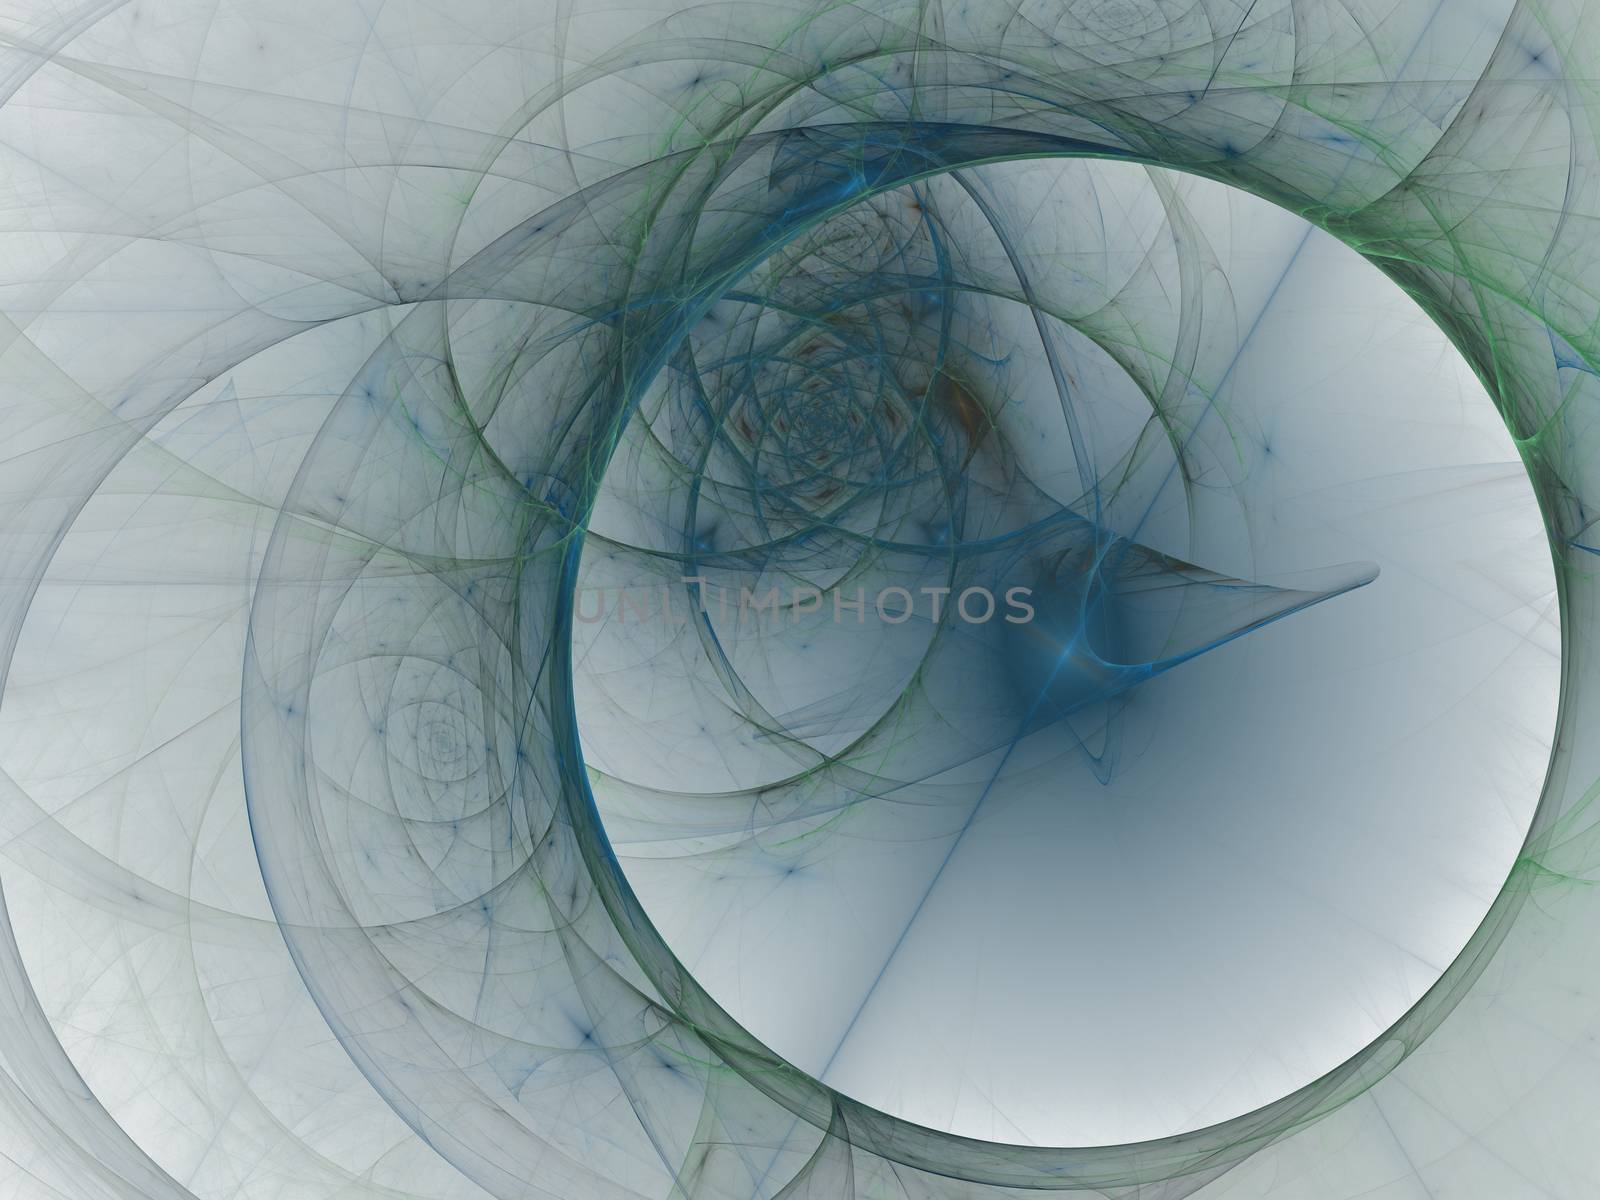 Perfect abstract digital blue background. Vortextunnel, 3d illustration. Composition of bubbles and circles and fractal elements with metaphorical relationship to space, science and modern technology.